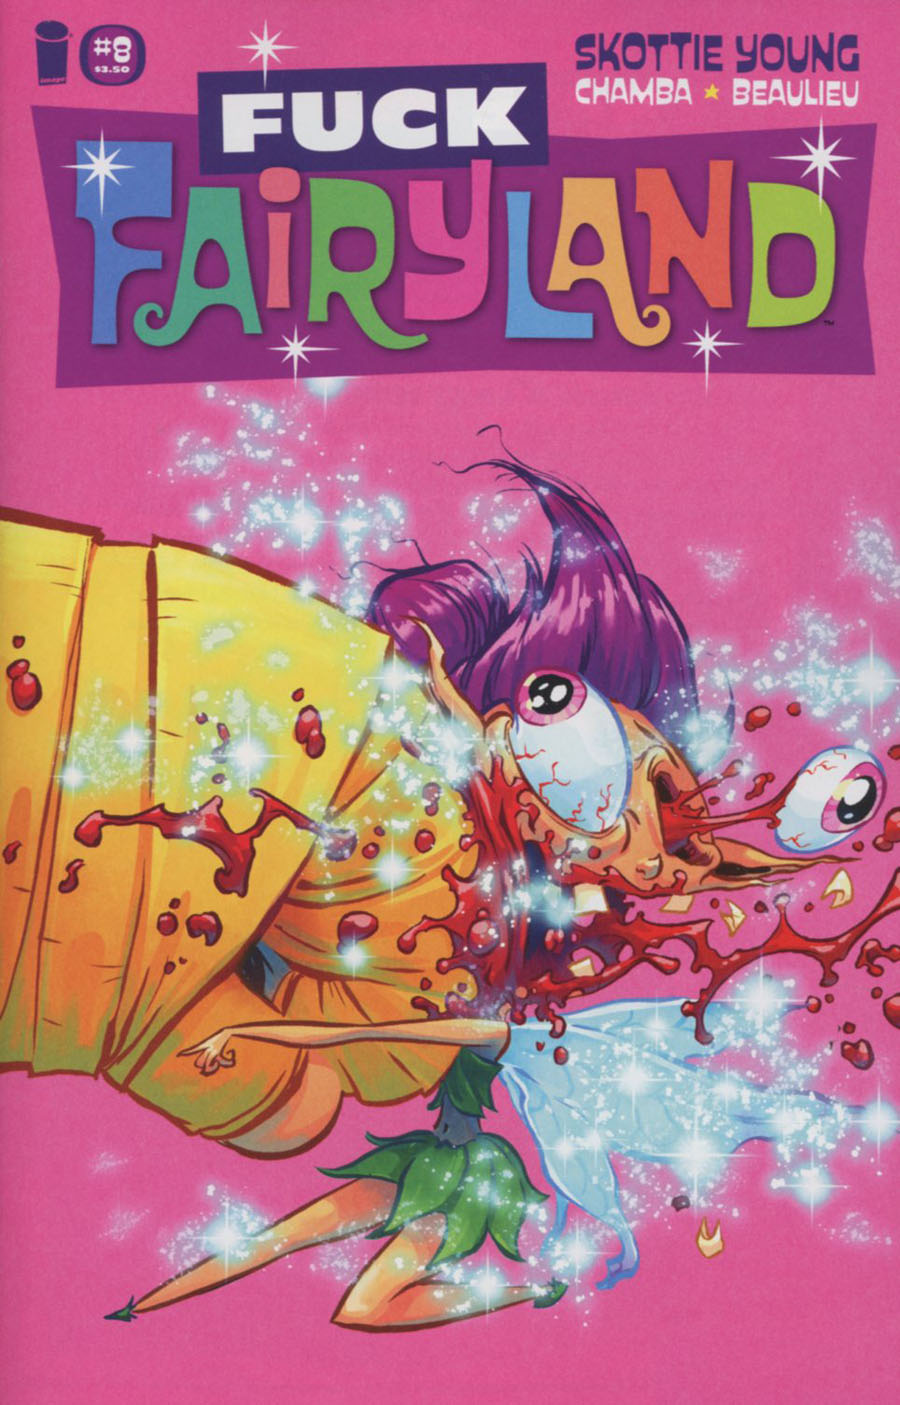 I Hate Fairyland #8 Cover B Variant Skottie Young F*ck Fairyland Cover